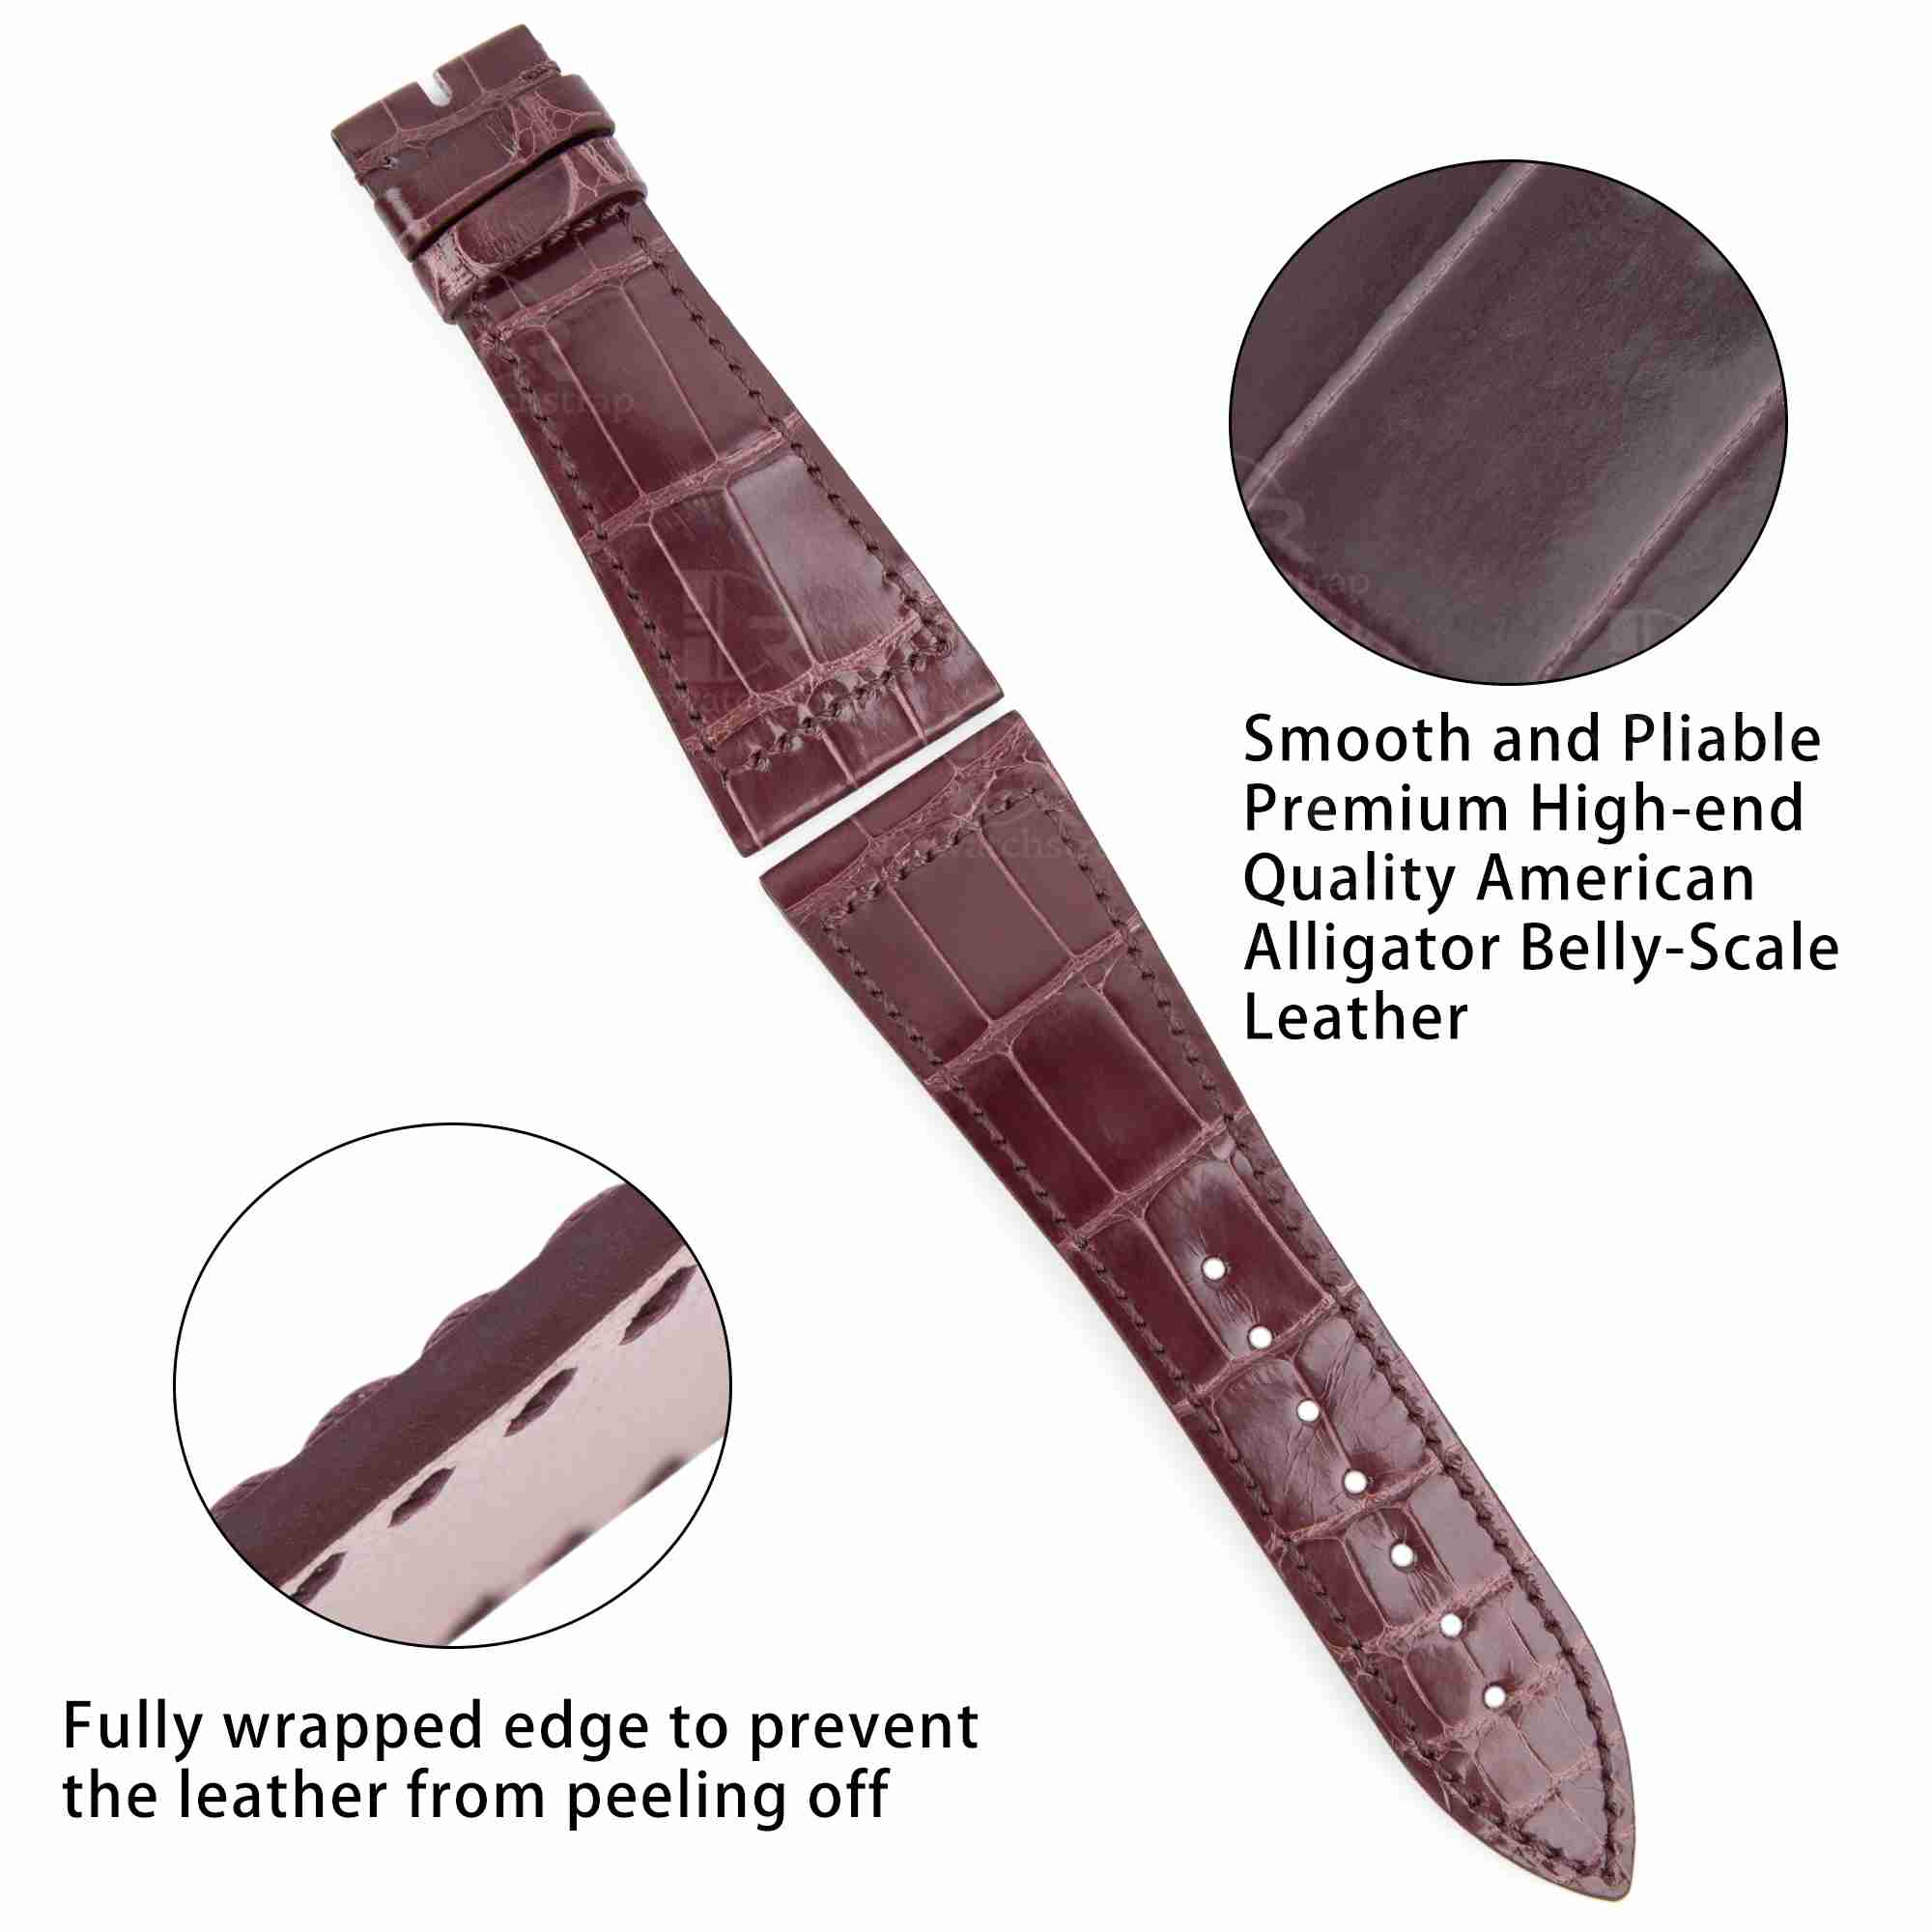 Custom handmade best quality grade A American crocodile 26mm Brown leather alligator strap and watch band replacement fit for Franck Muller Master Square 6000 h SC DT luxury watches online - High-end leather straps 100% hand stitched for sale